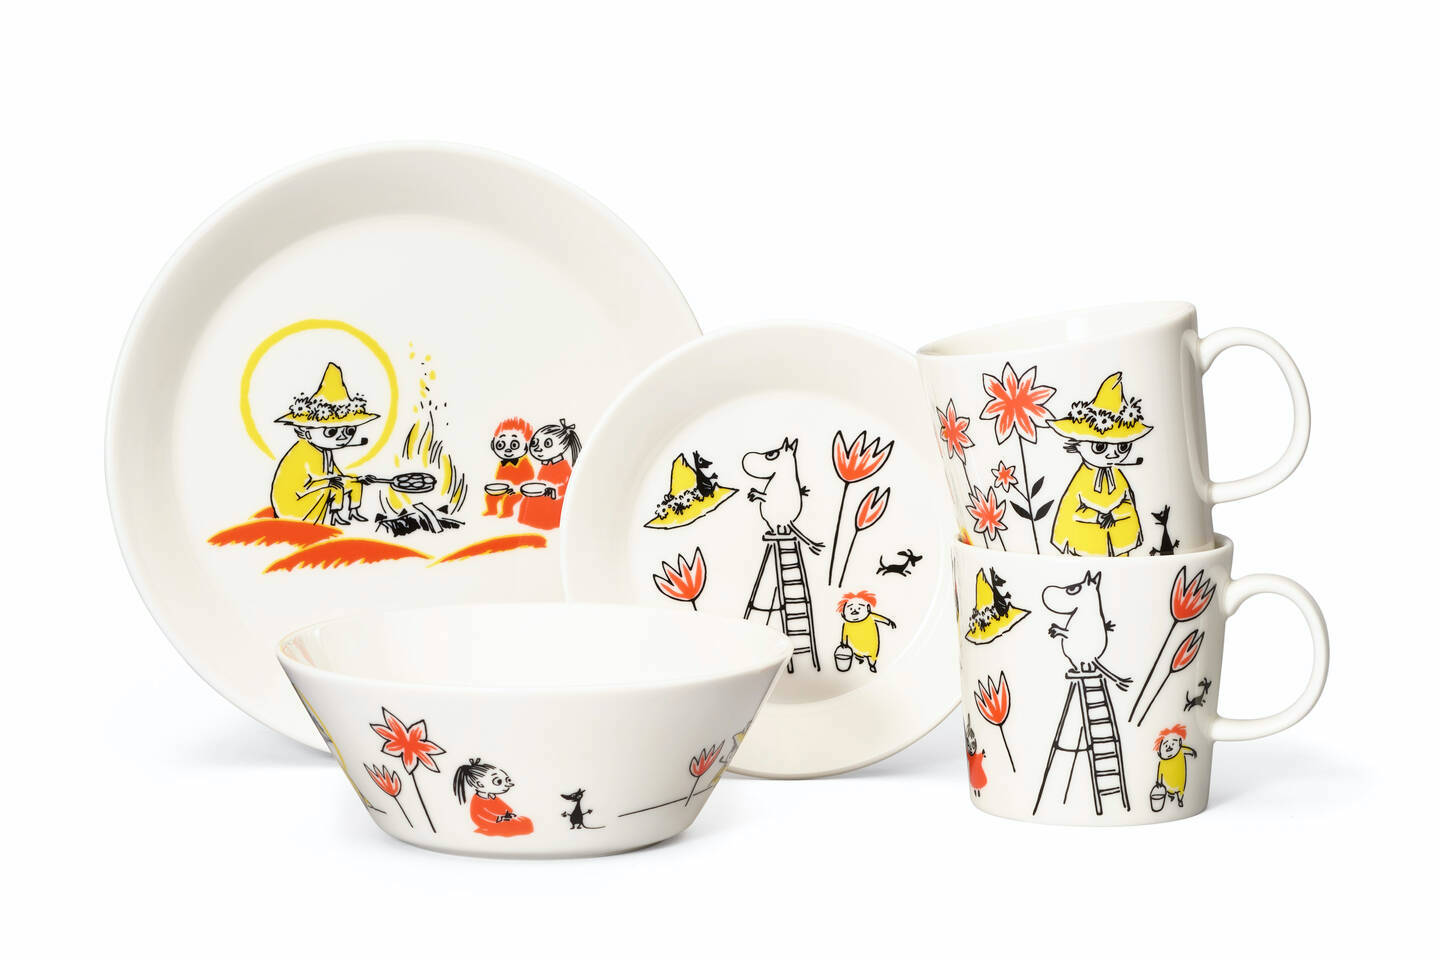 Arabia x Red Cross Moomin dinnerware collection displayed with plain background